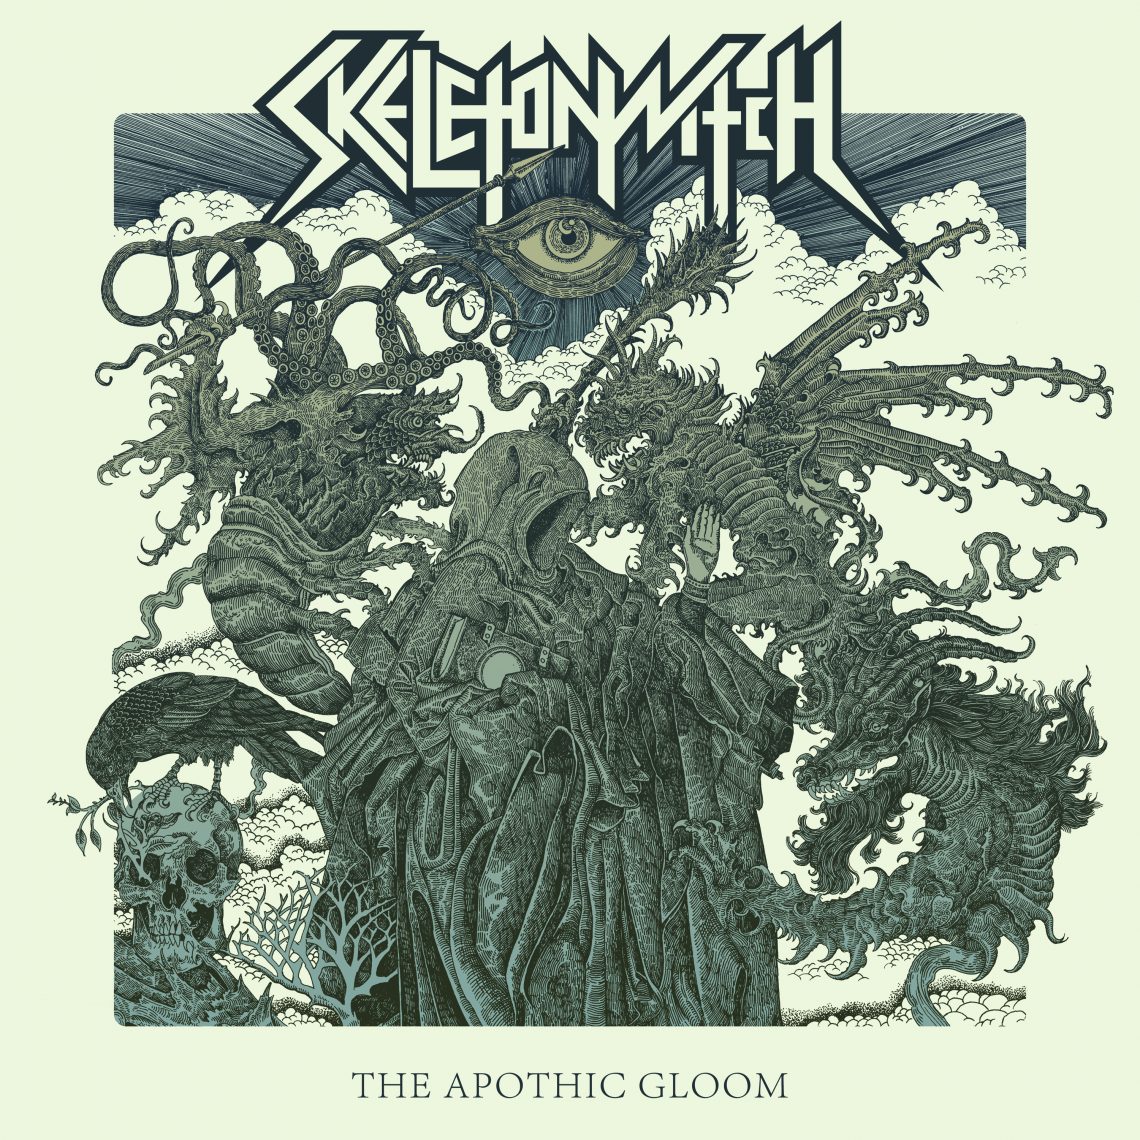 Skeletonwitch – The Apothic Gloom CD Review